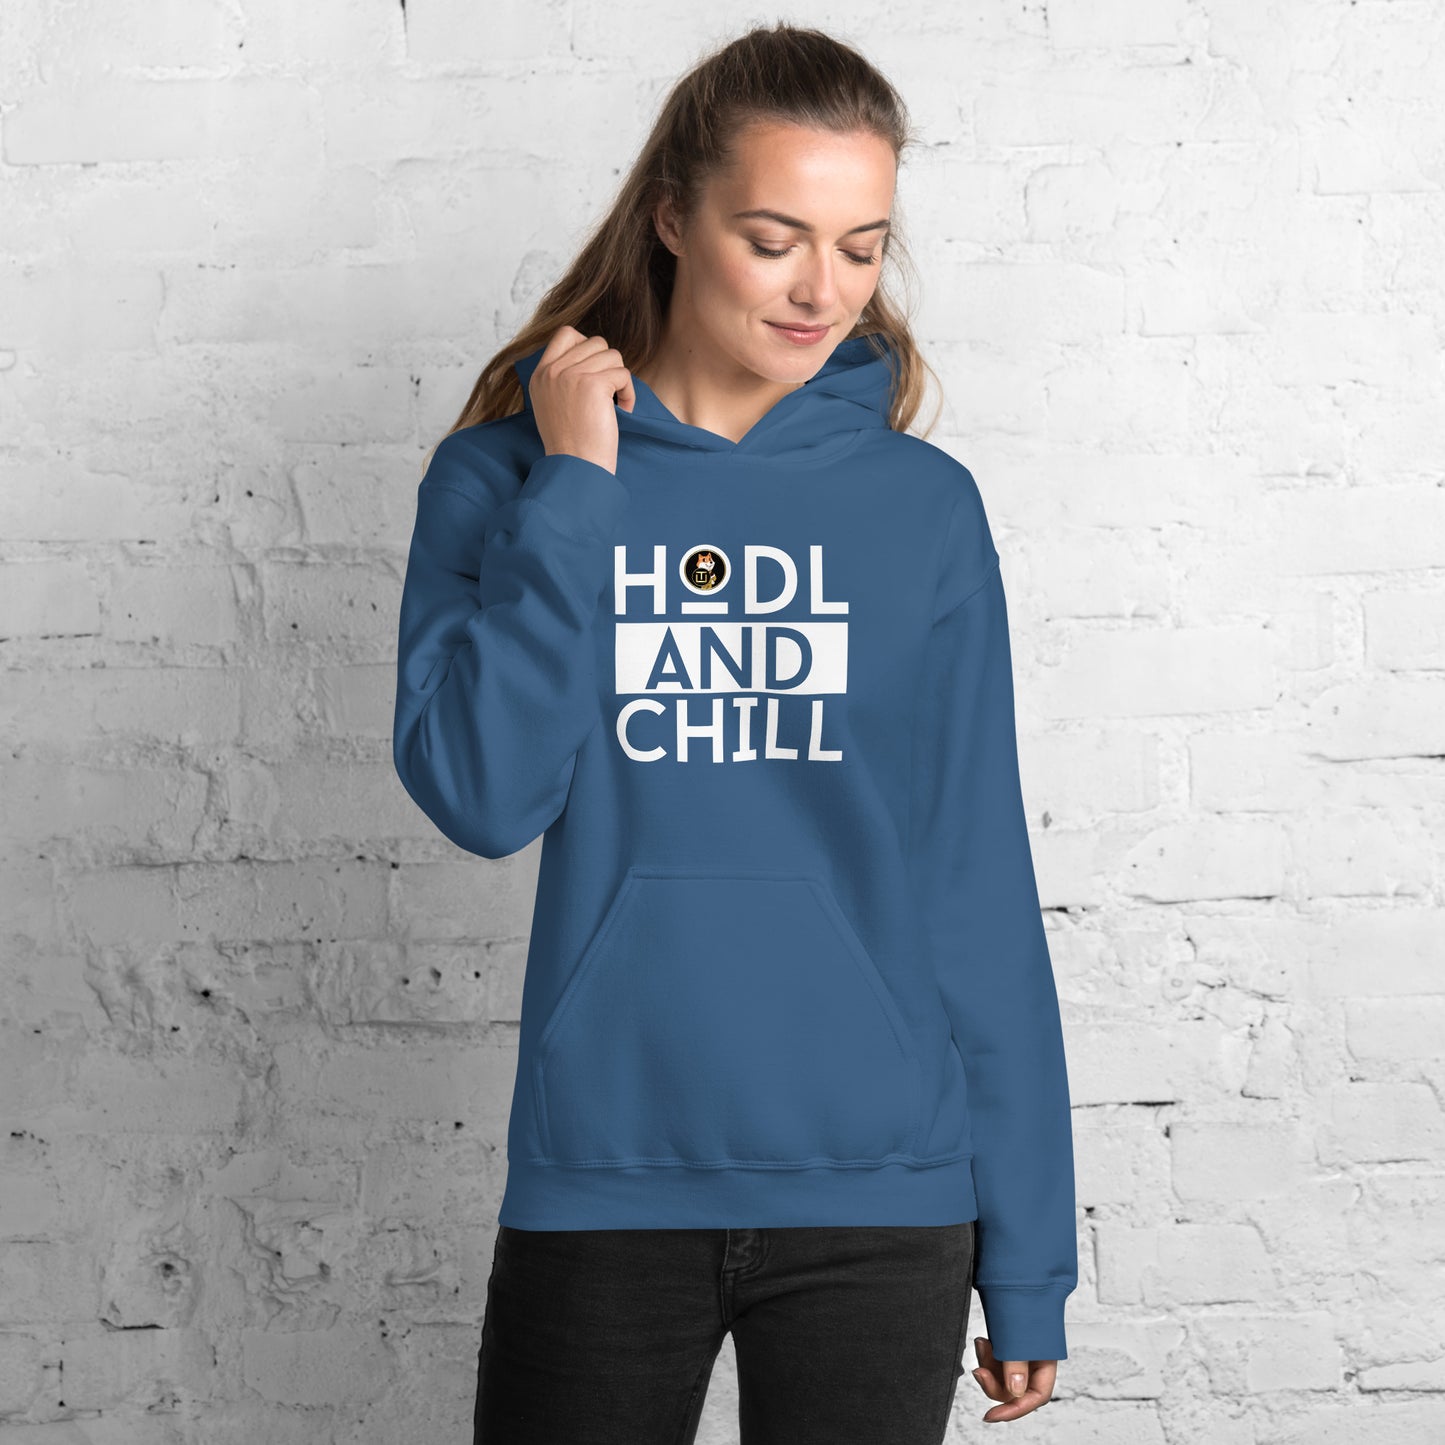 Son Of Doge 'Hodl And Chill' Women's Hoodie